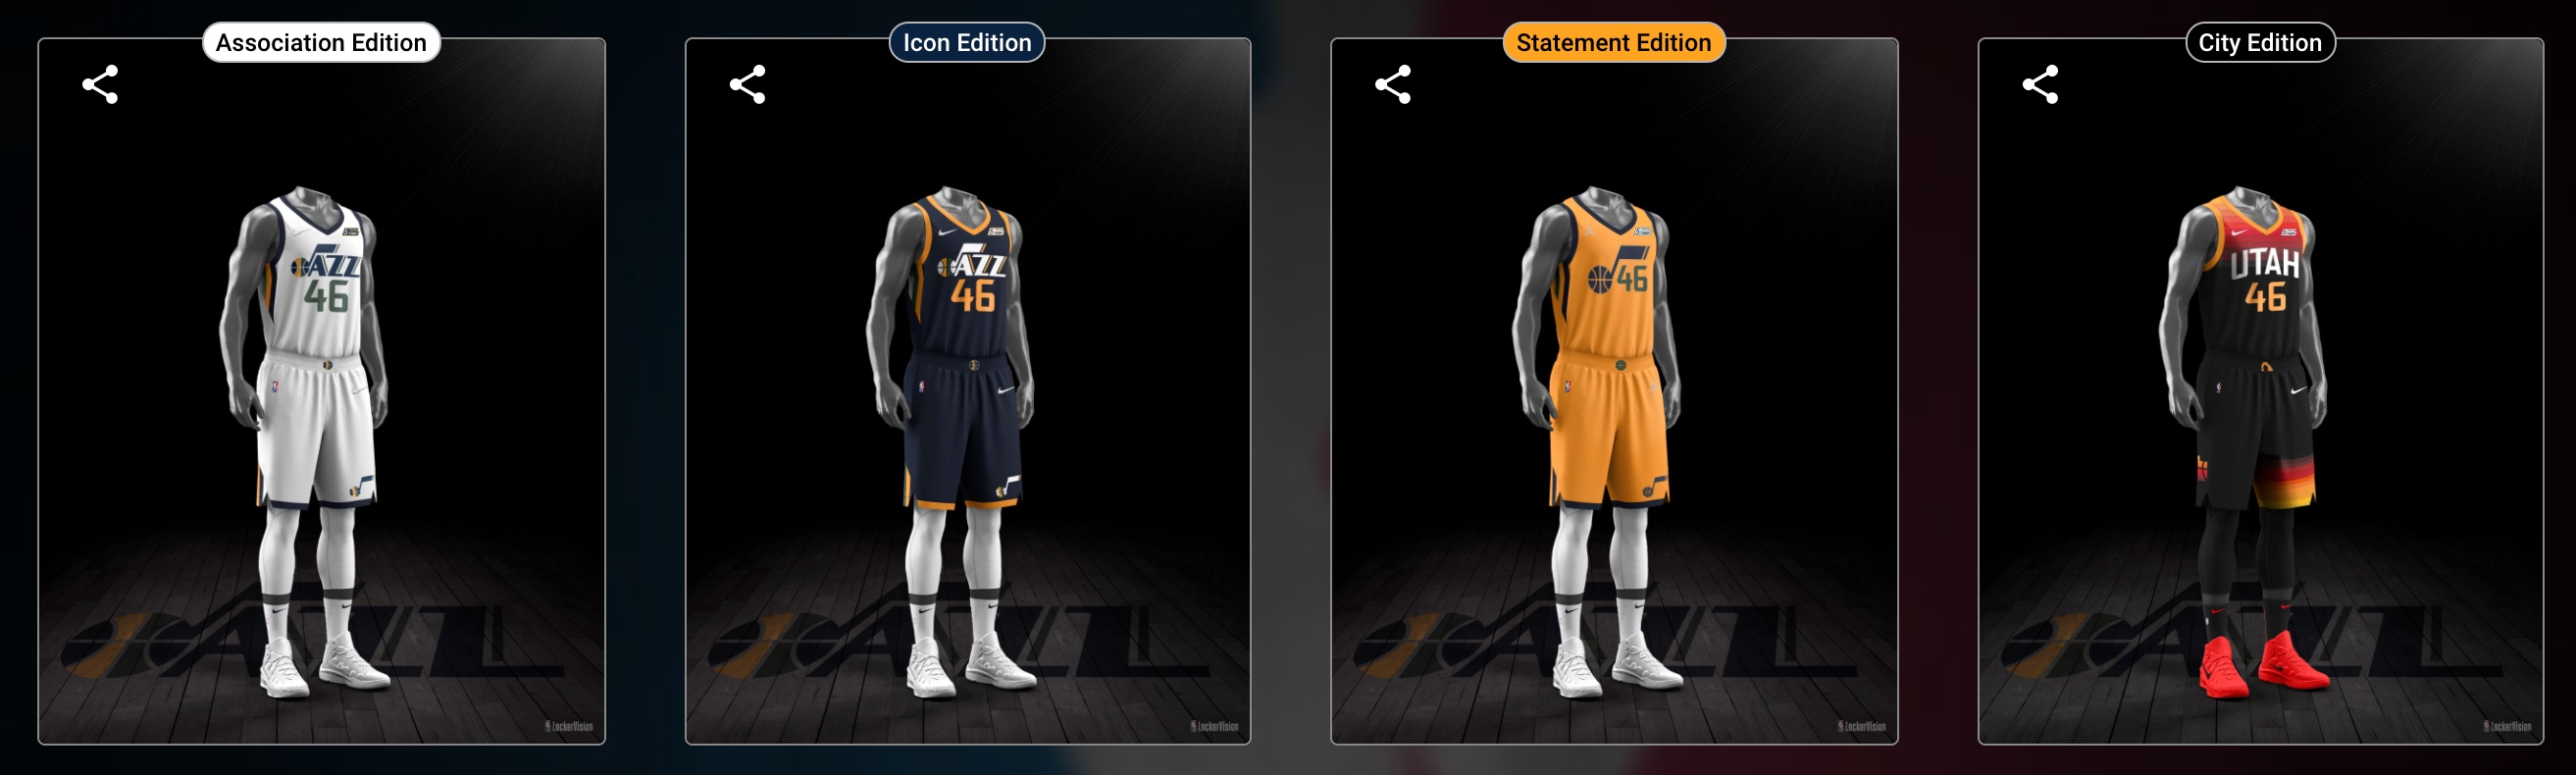 My idea for a jazz rebrand. I tried to incorporate the old purple mountains  in a new modern way as well as keep the sunset red rocks design of the city  jerseys.